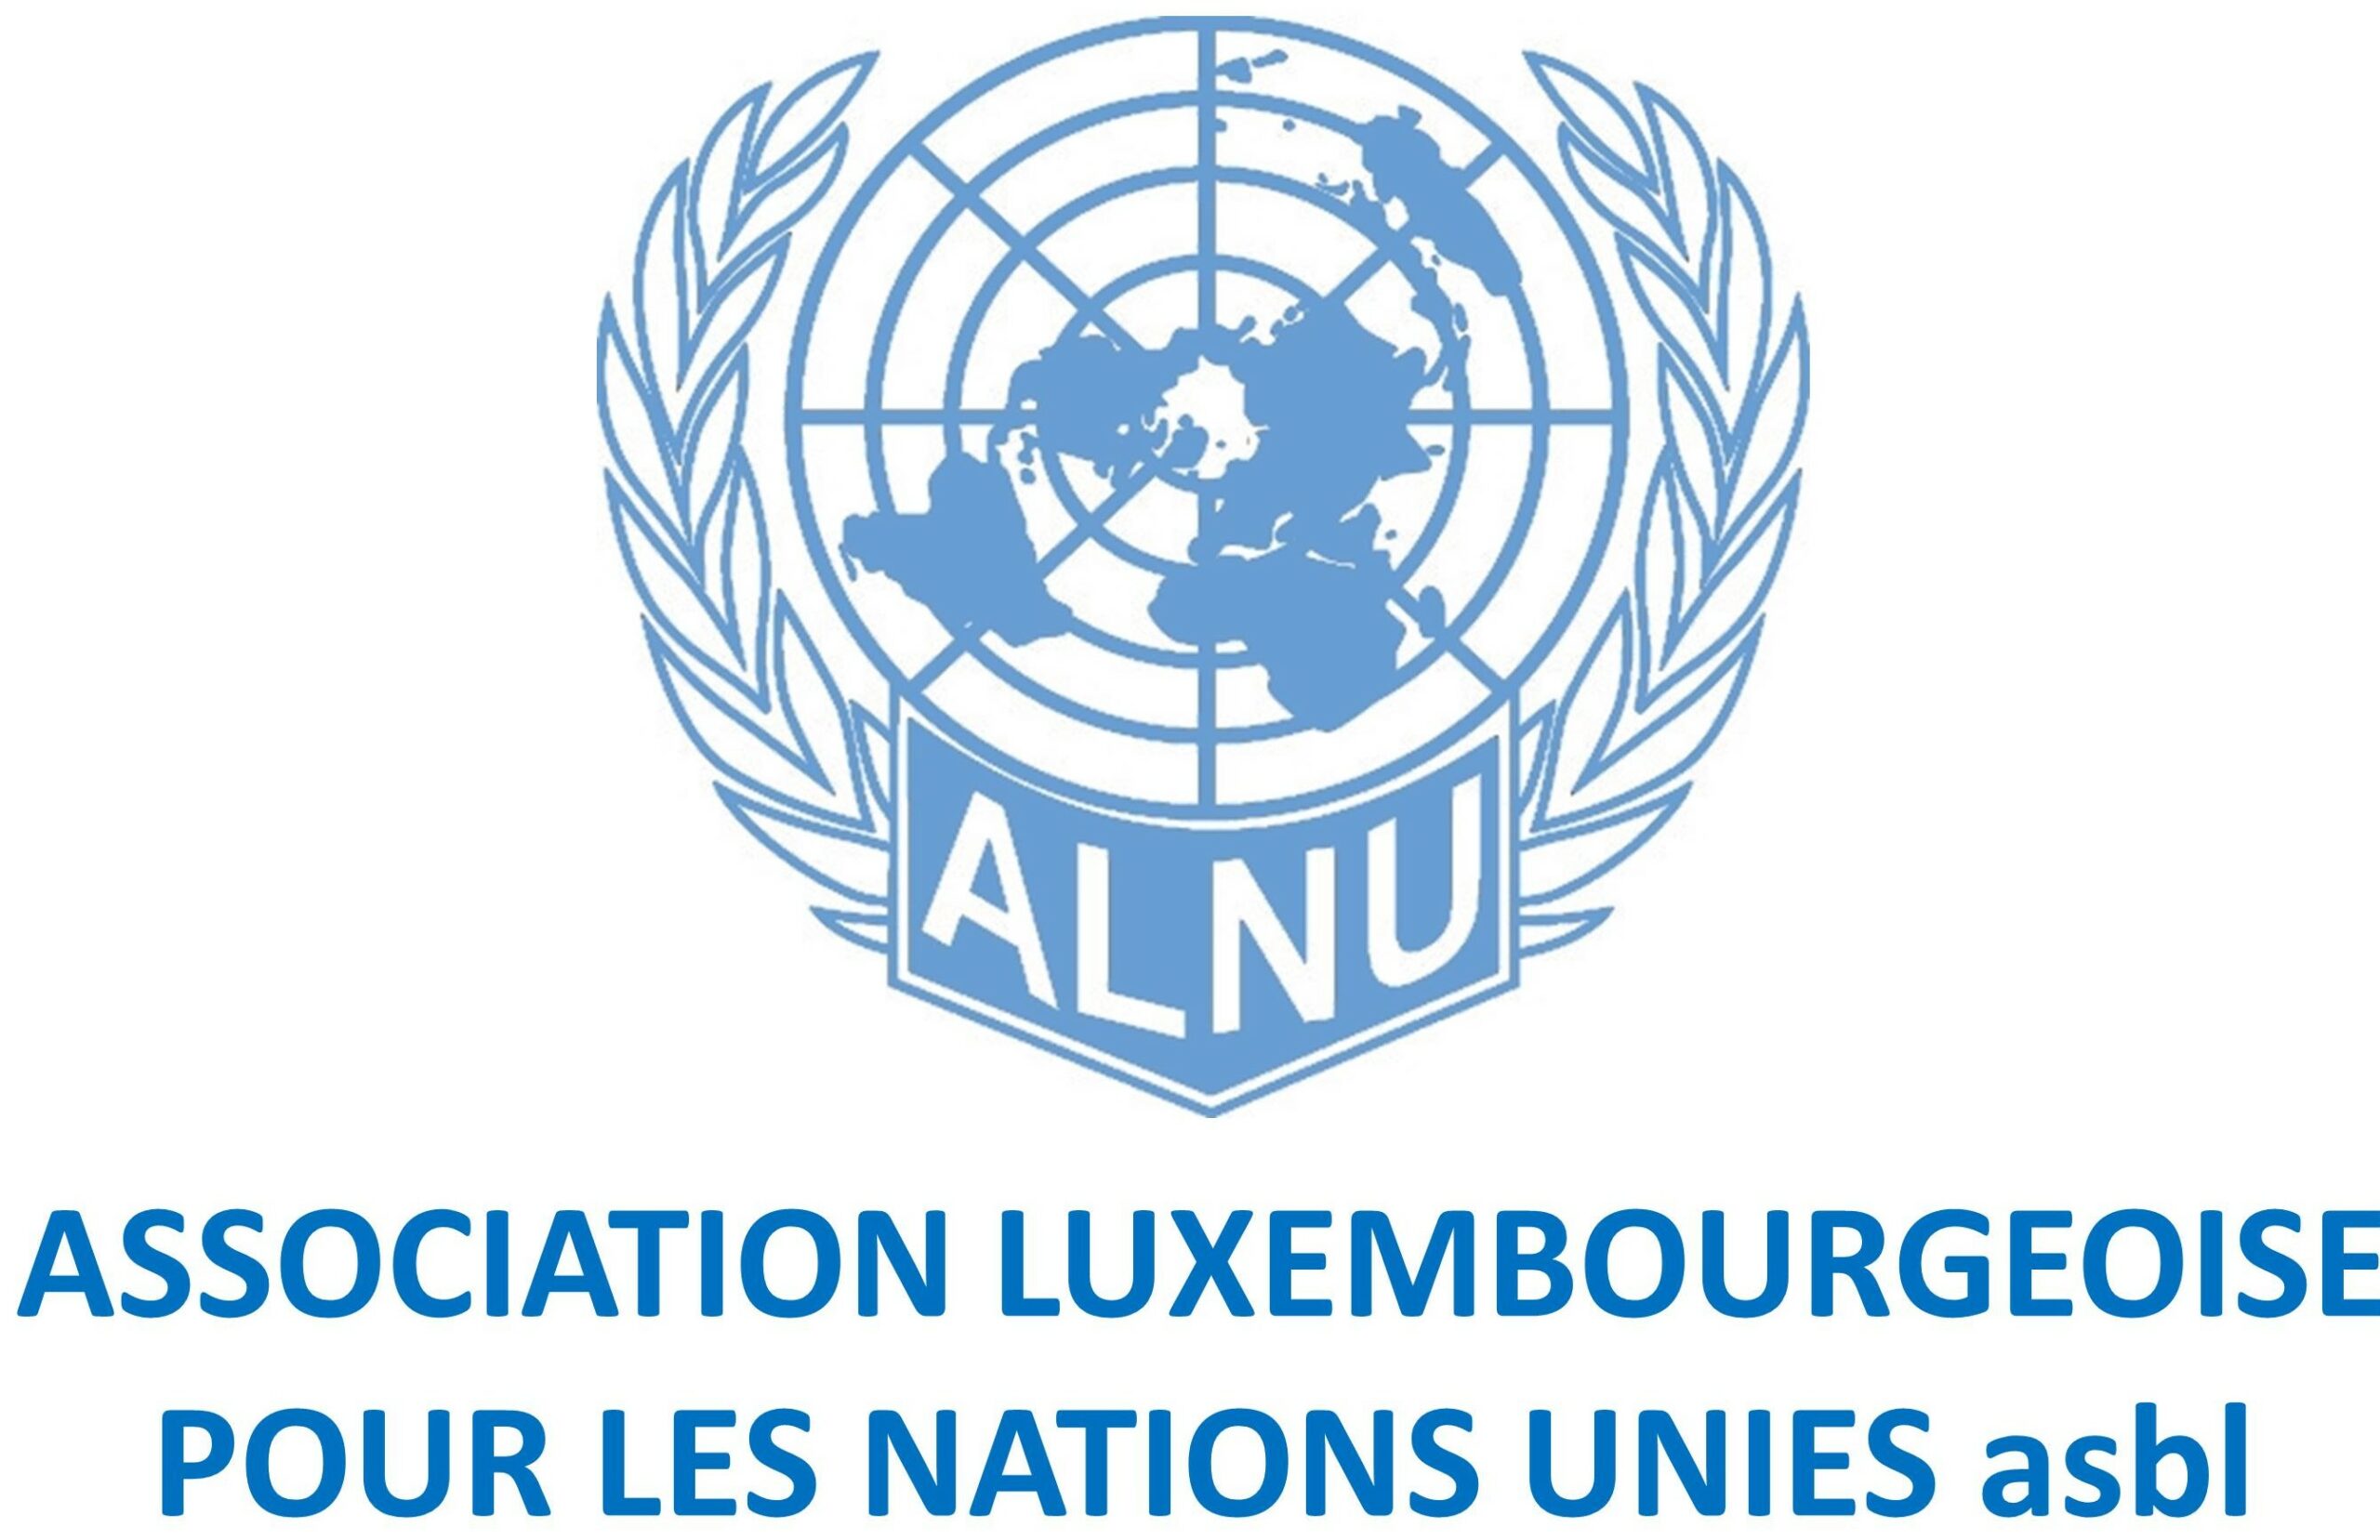 Association luxembourgeoise pour les Nations Unies &#8211; ALNU